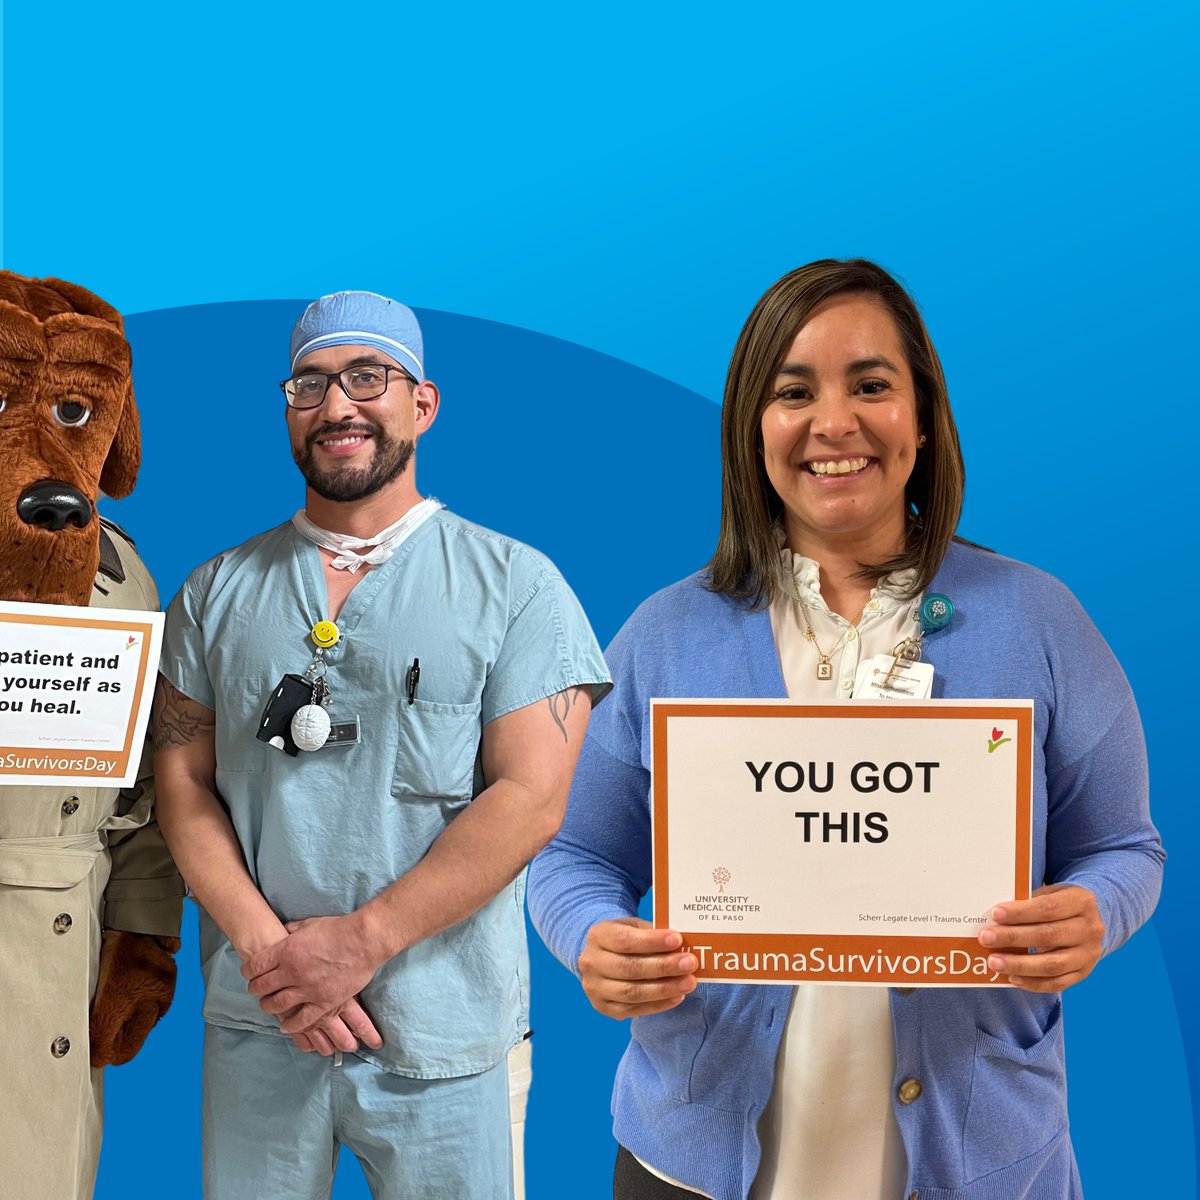 On this #NationalTraumaSurvivorsDay, we recognize the hardships trauma survivors have had to overcome & the inspiration they are for us all.

Every year, we host a blood drive in honor of our trauma survivors. Among some of our blood donors were members of @EPPOLICE & McGruff!